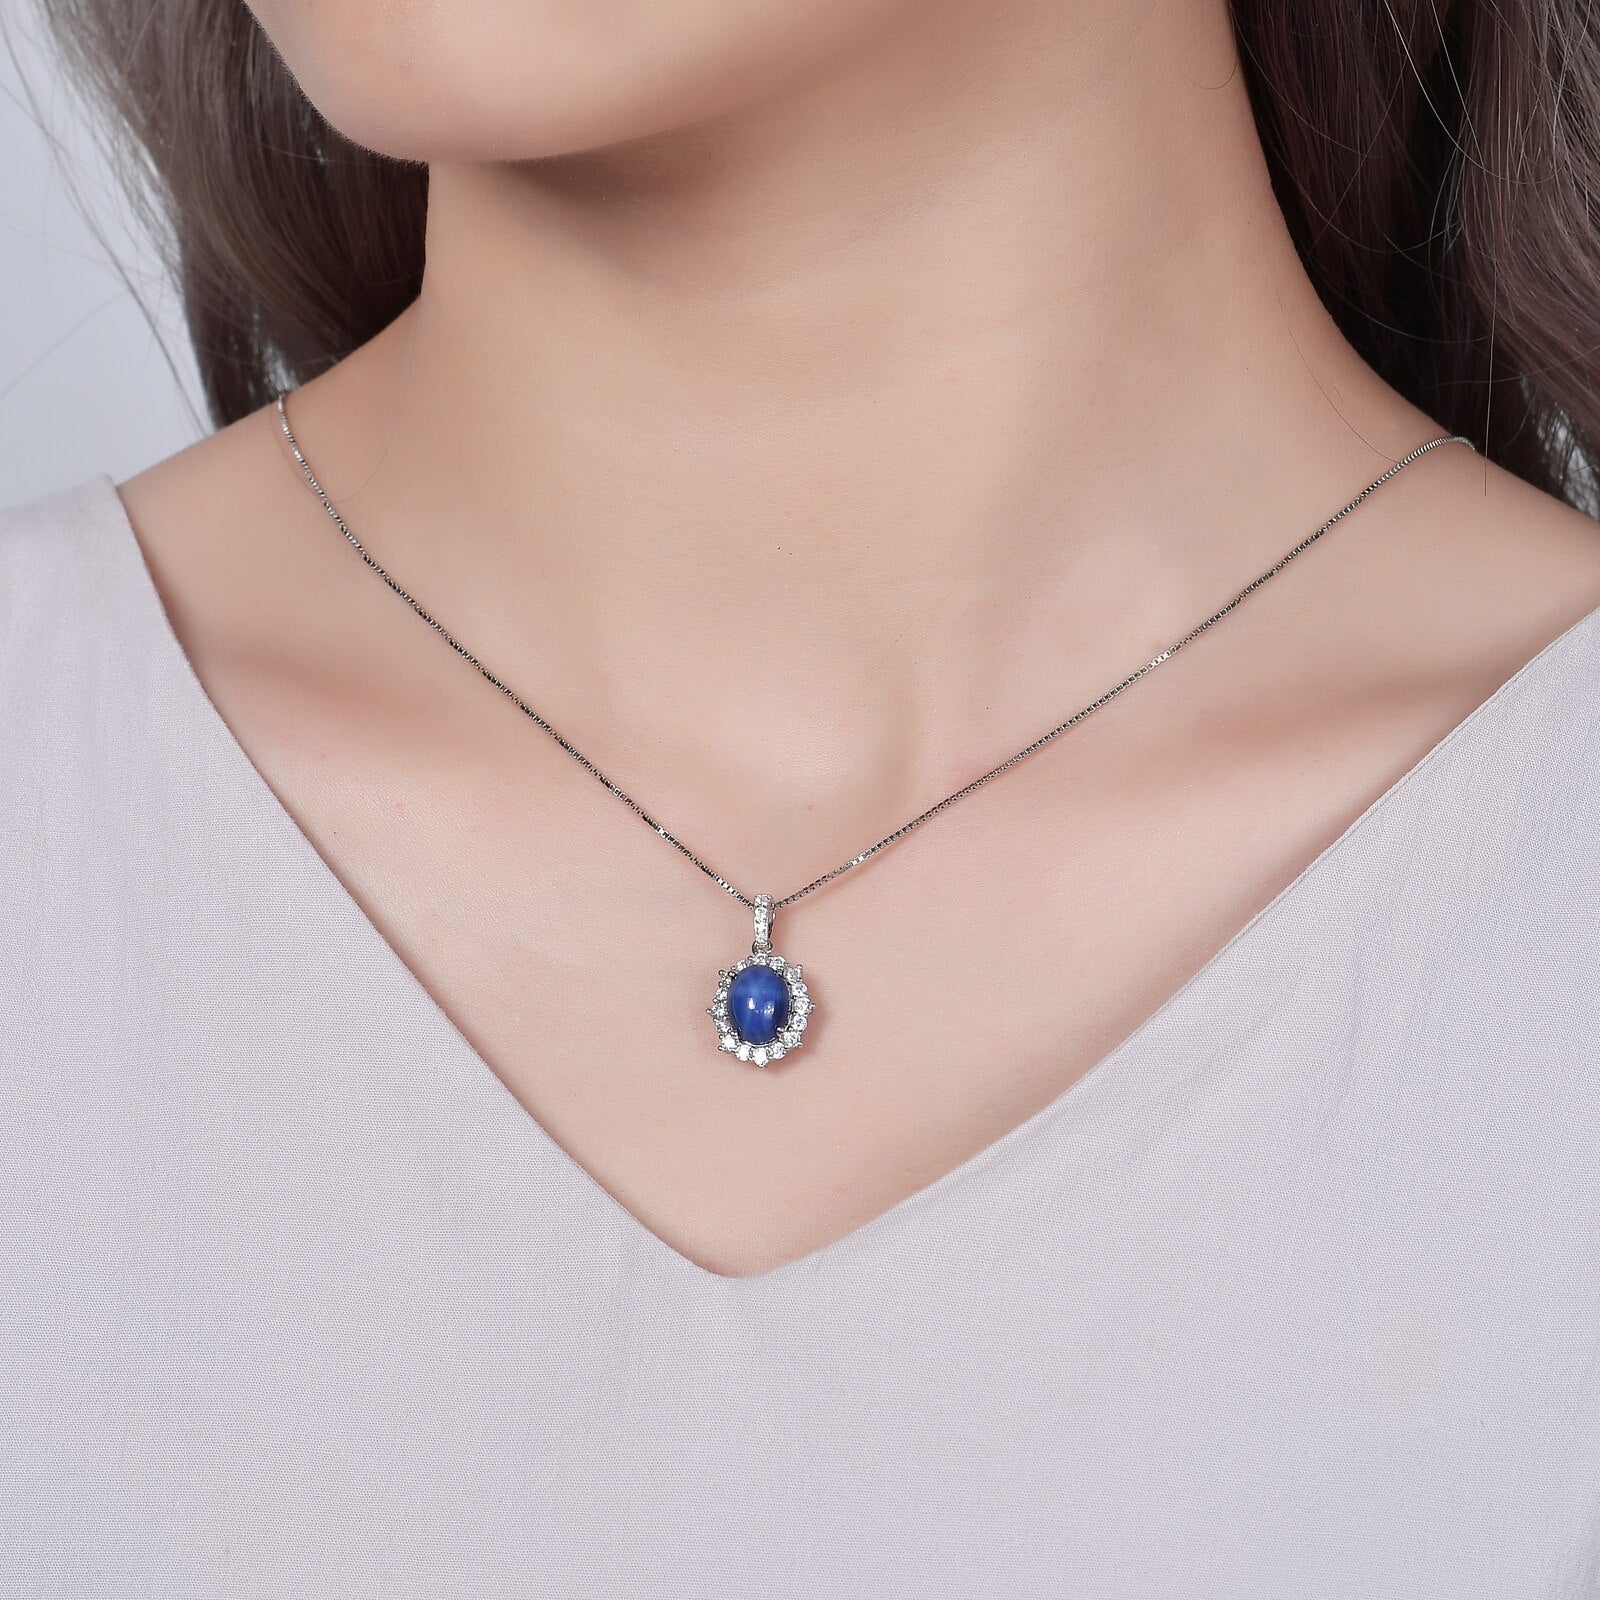 GEM&#39;S BALLET Dainty Blue Lindy Star Sapphire Statement Pendant Necklace in 925 Sterling Silver Gift For Her Mothers Day Gifts